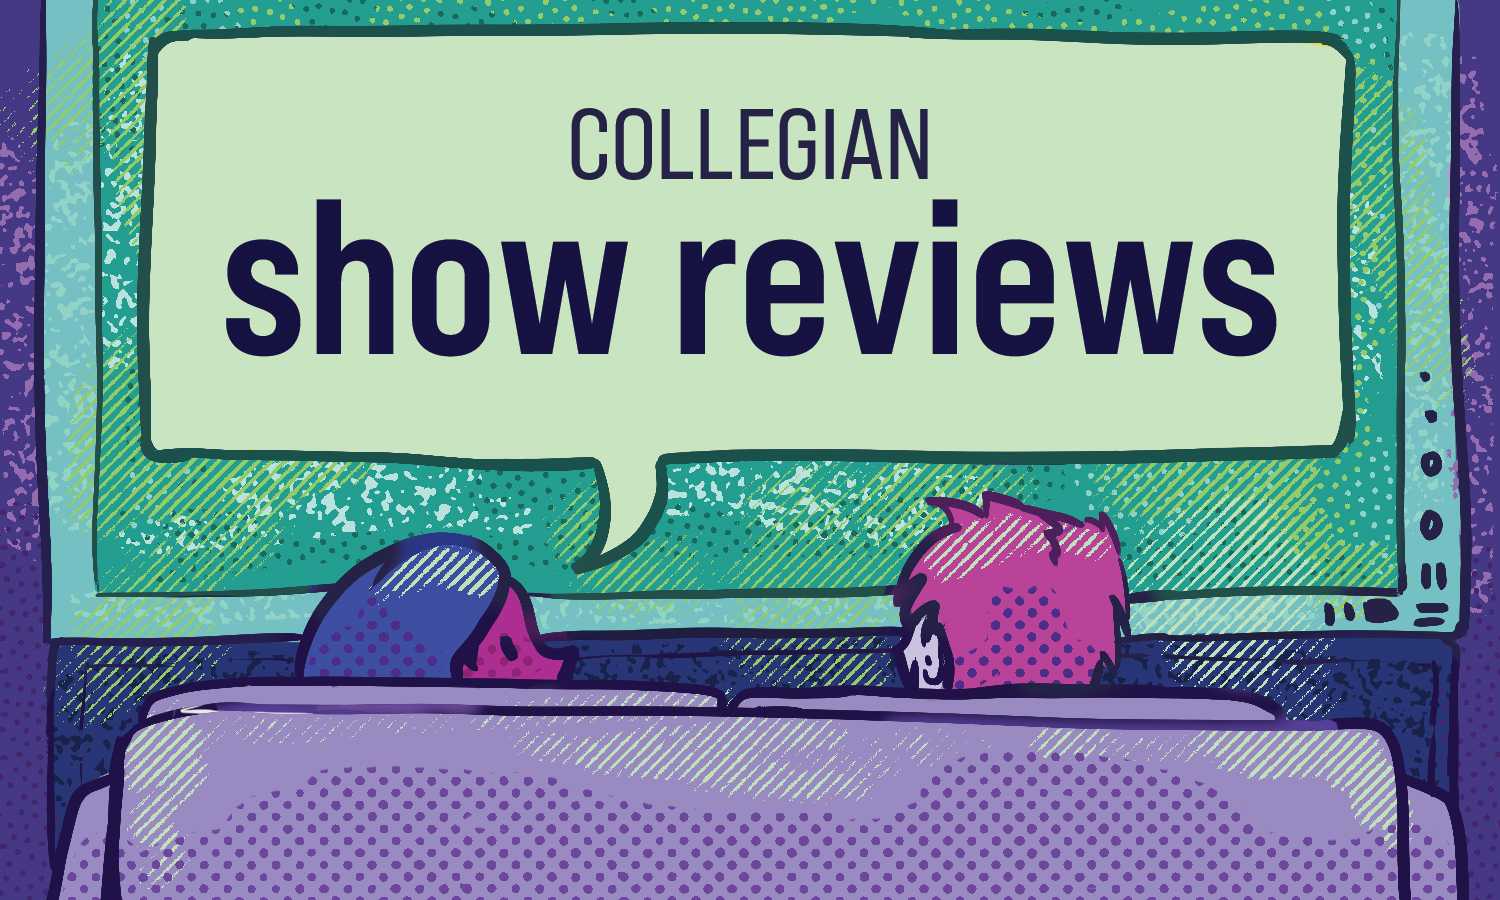 graphic illustration depicting two figures watching a movie screen with a speech bubble coming out of one figure saying "Collegian Show Reviews"